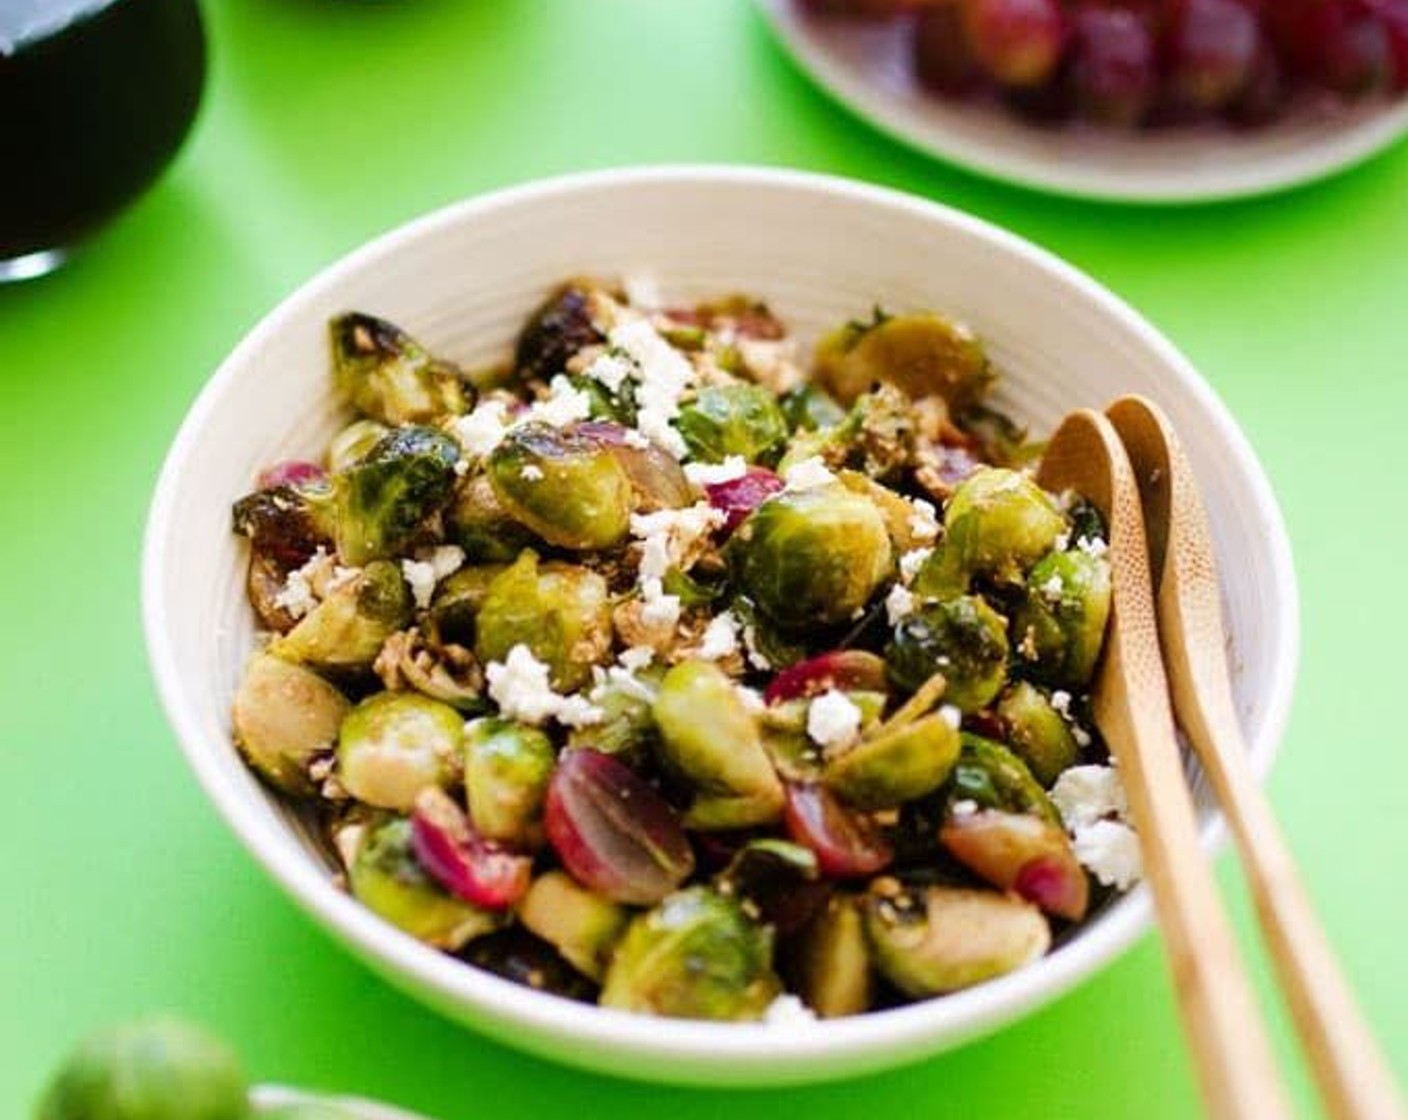 Roasted Brussels Sprouts with Balsamic, Garlic, and Grapes